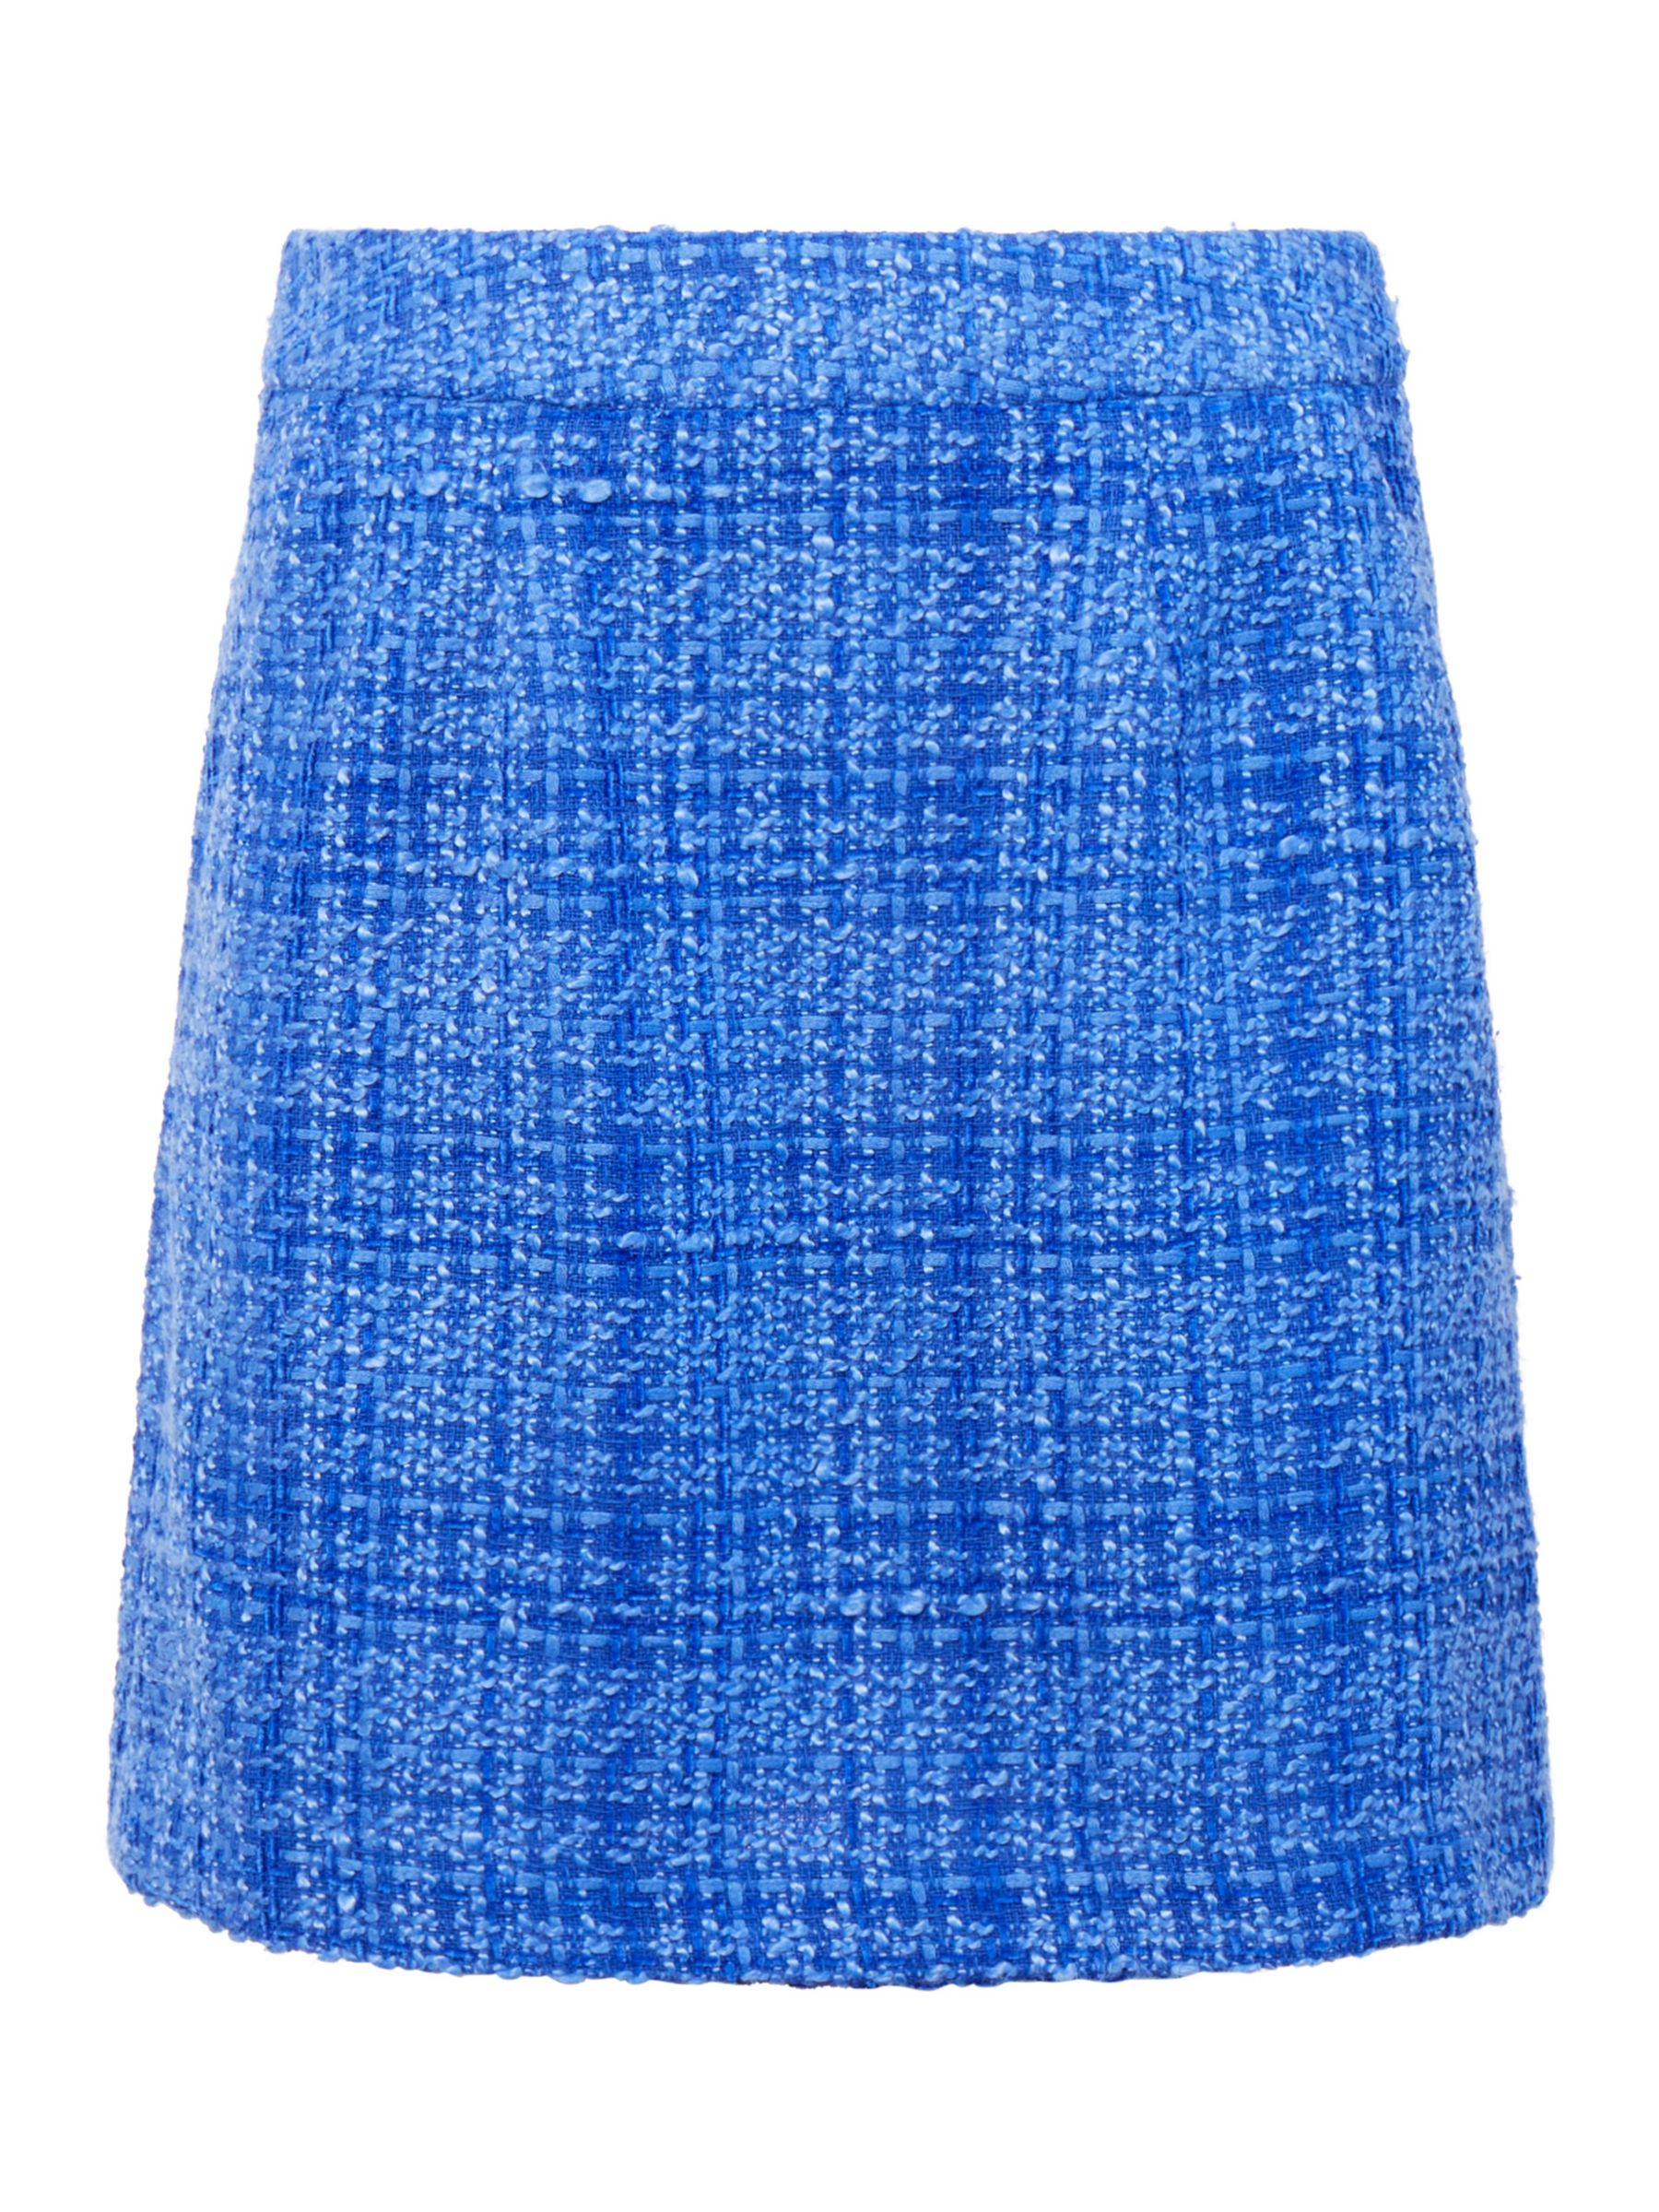 French Connection Azzurra Tweed Mini Skirt, Light Blue Depths, 16